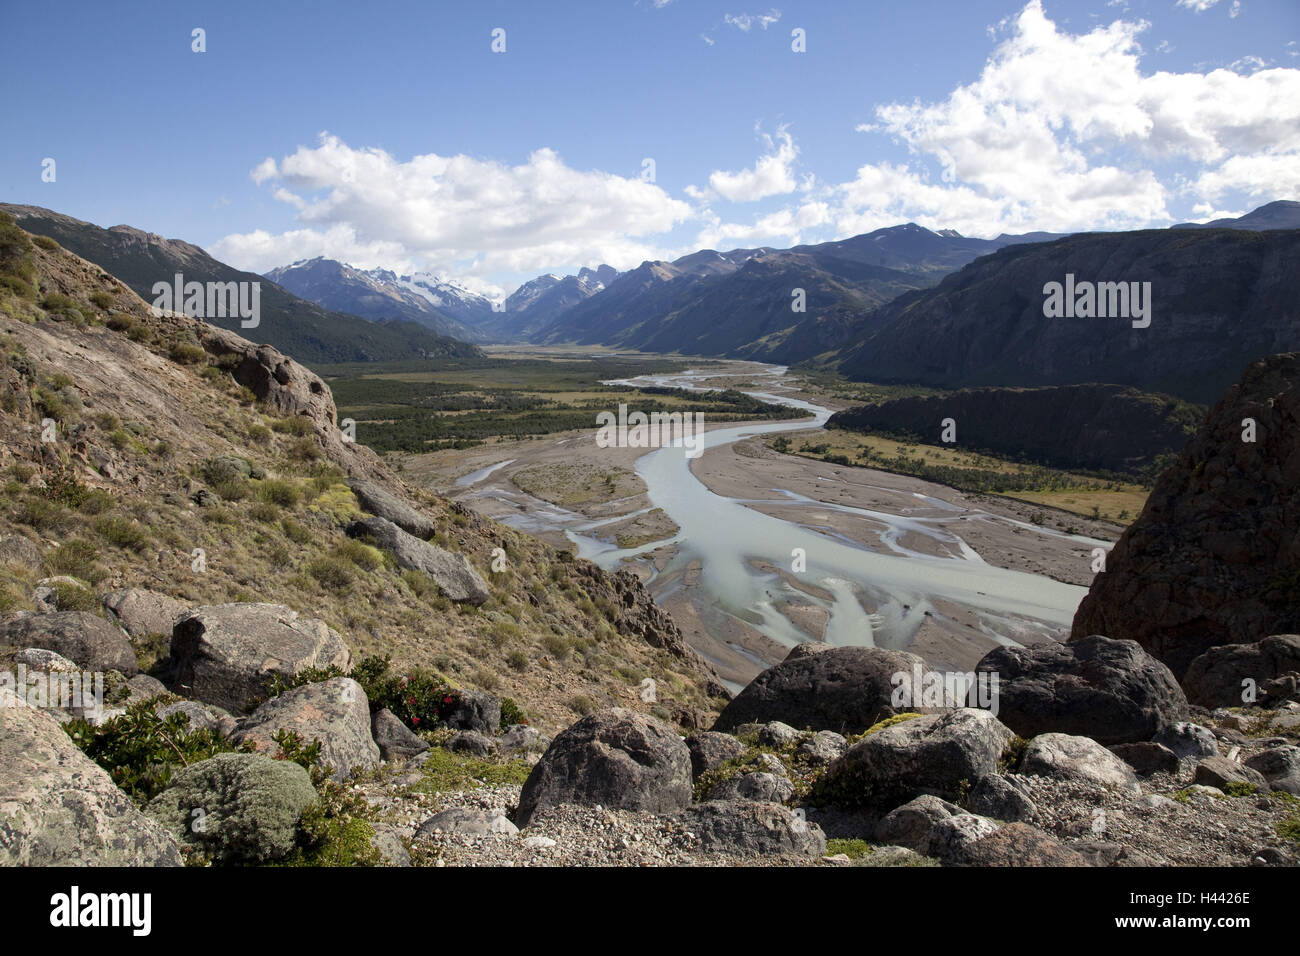 Argentina, Patagonia, Fitz Roy, tablespoon Chalten, the Andes, batch Glaciares national park, river scenery, Stock Photo